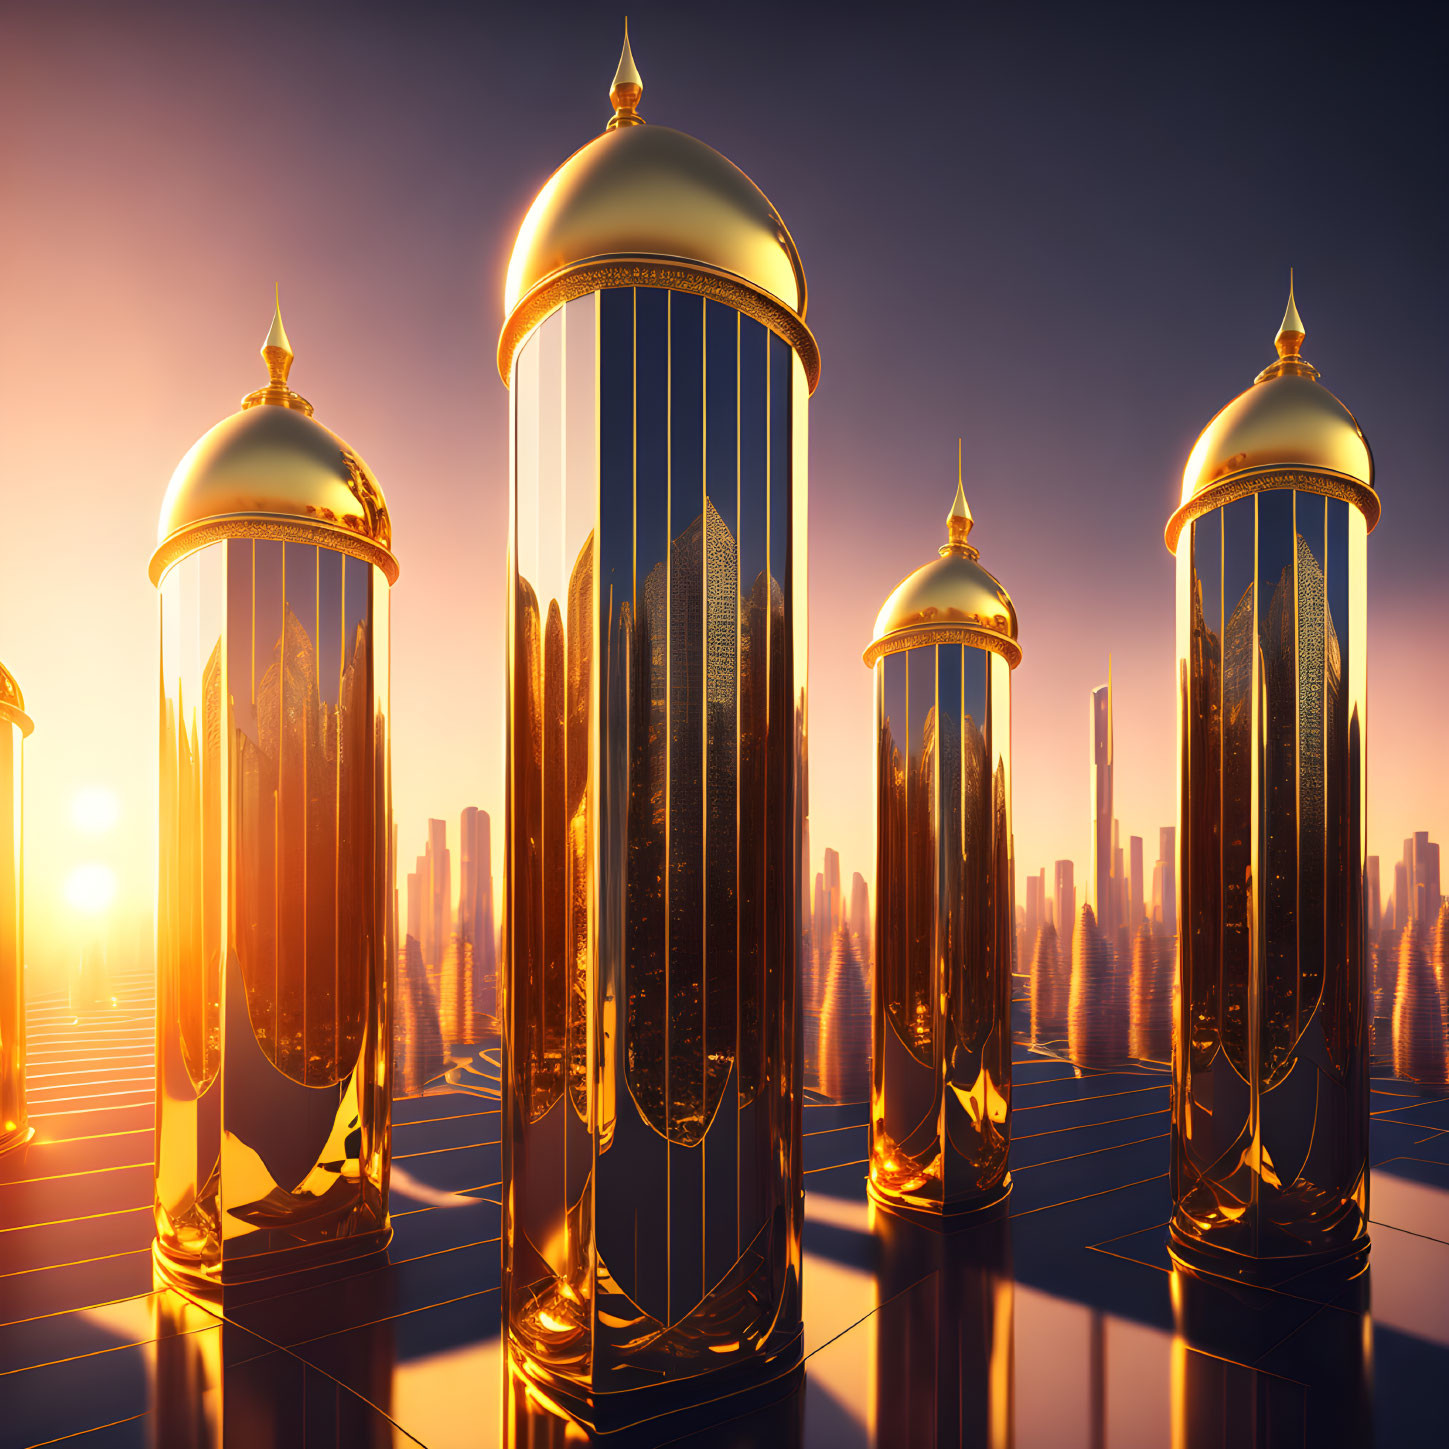 Golden cylindrical structures with domed tops in cityscape sunset scene